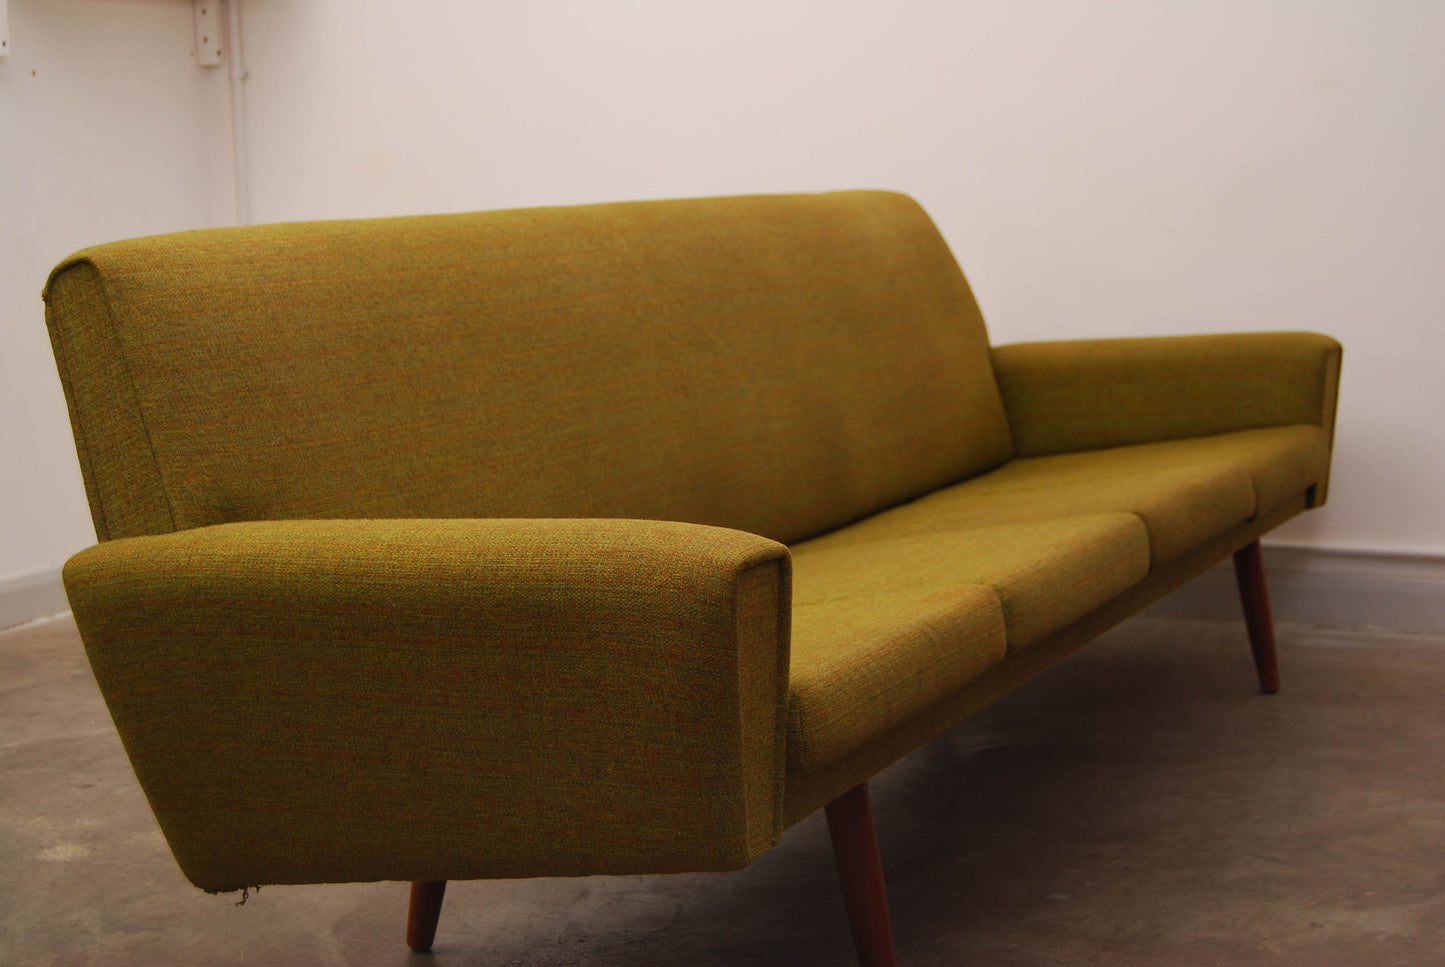 Four seat sofa in olive green wool